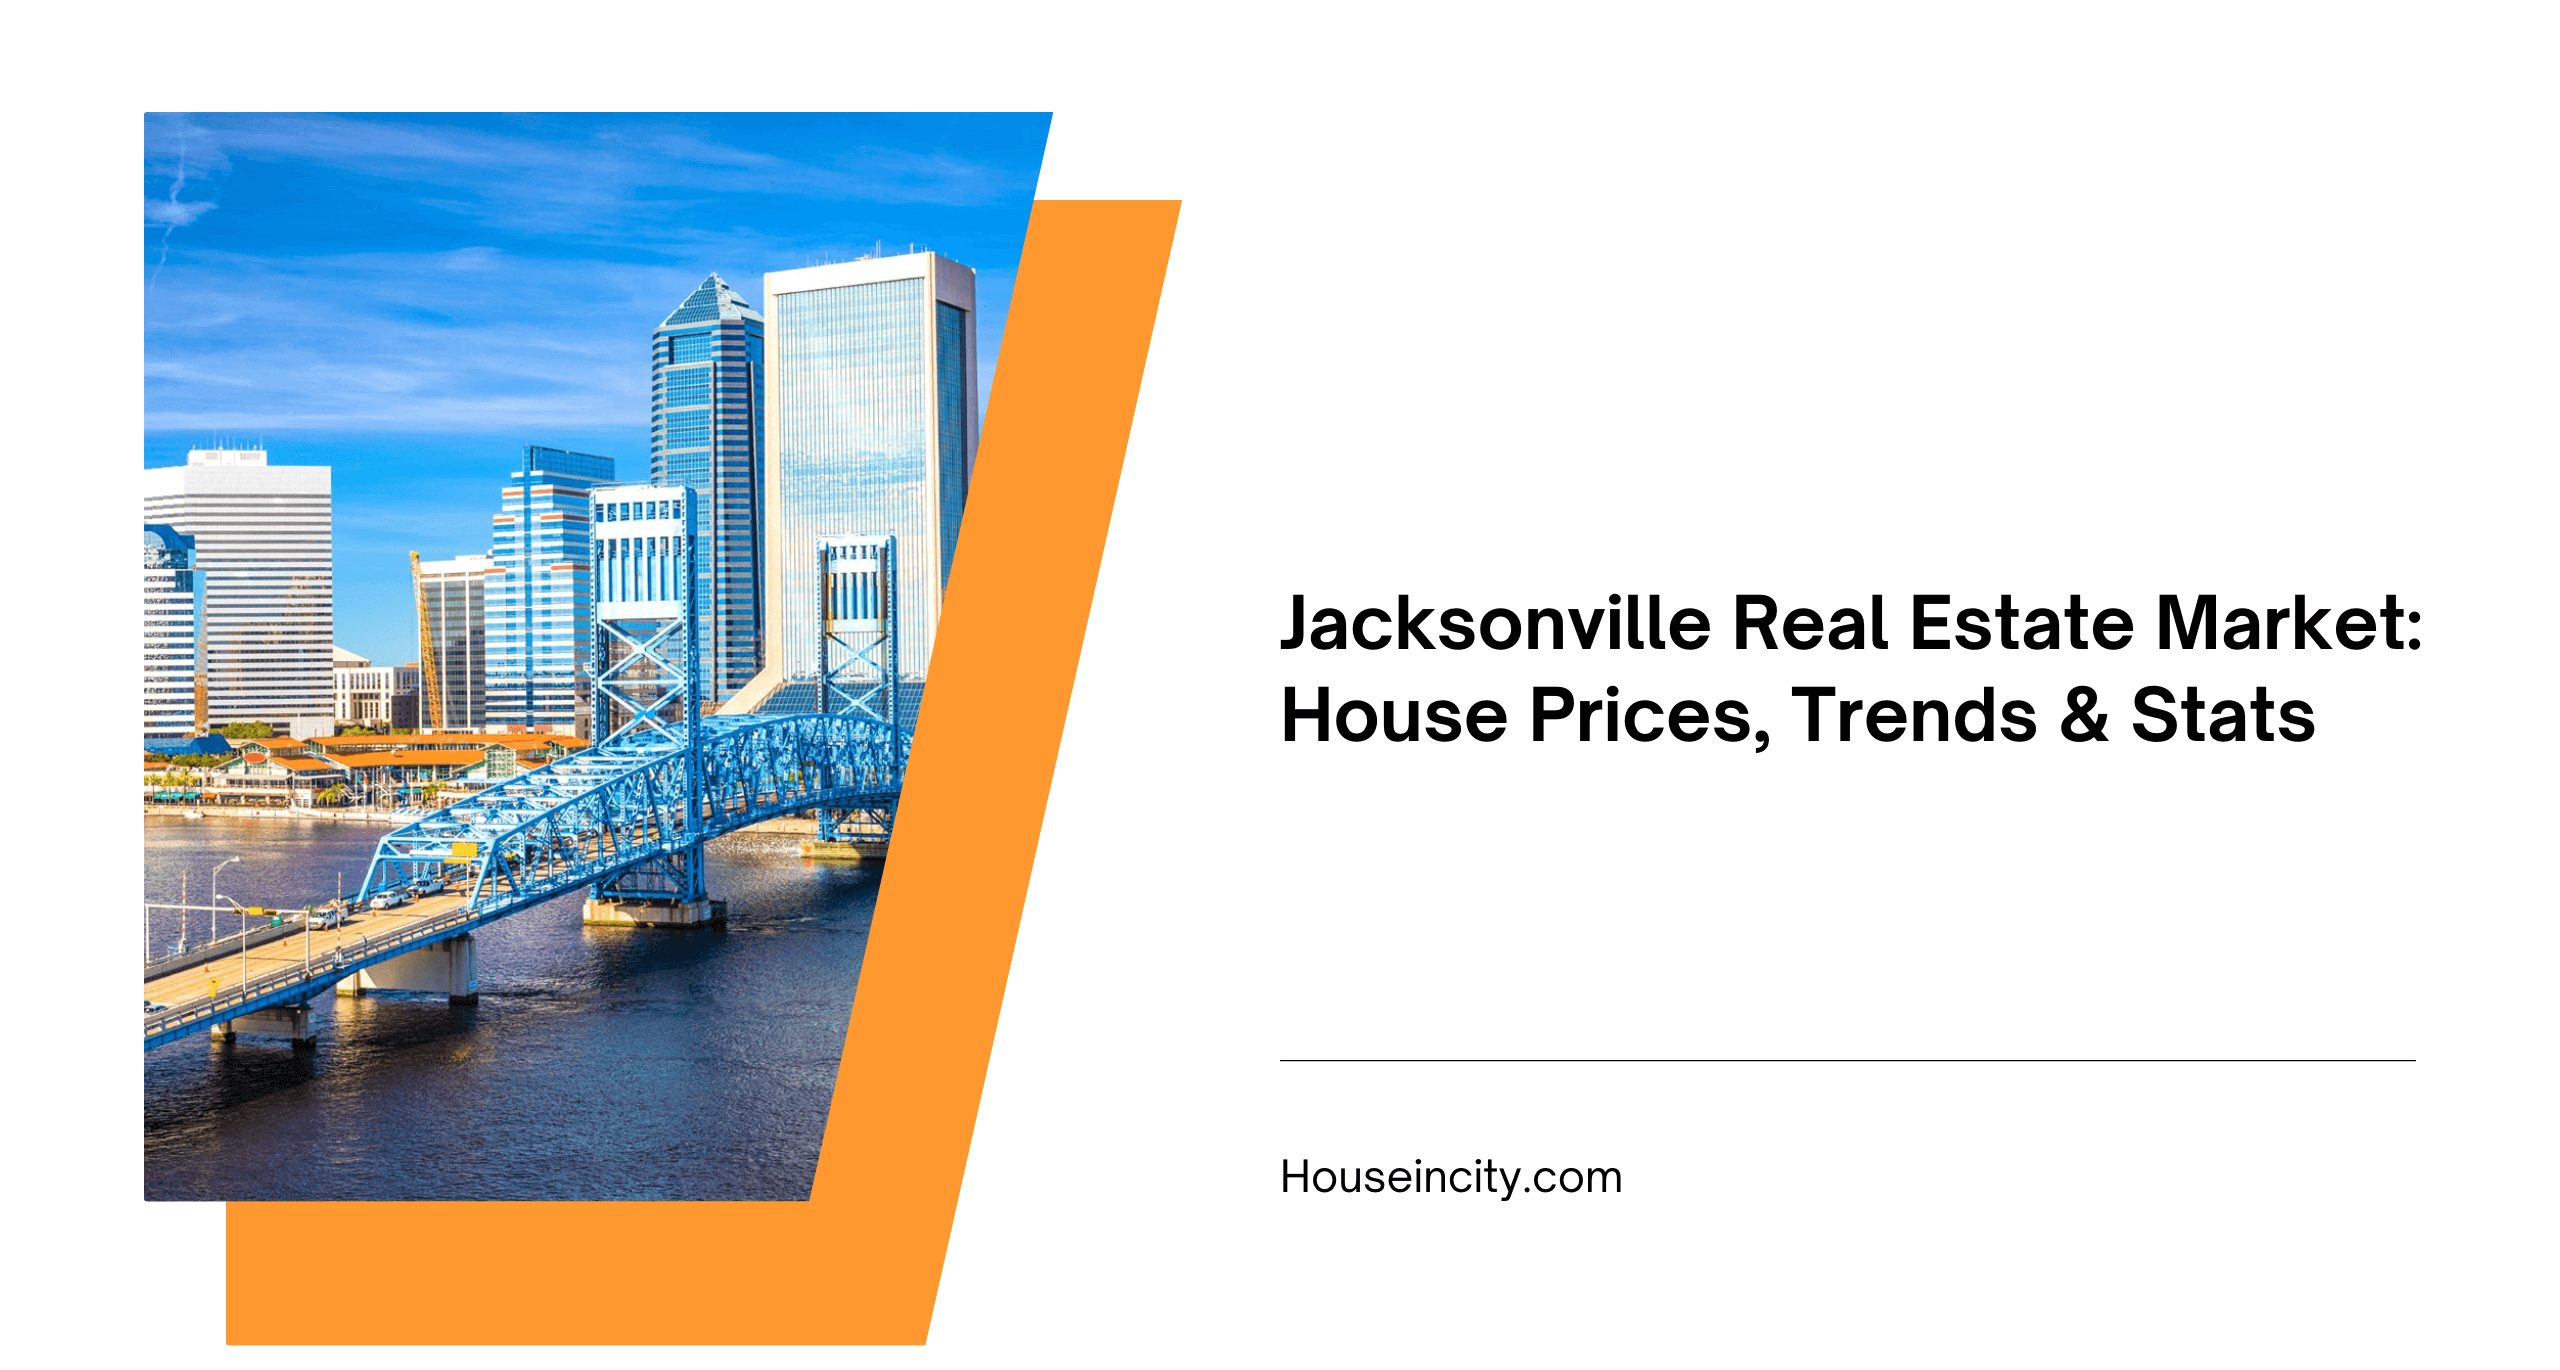 Jacksonville Real Estate Market: House Prices, Trends & Stats